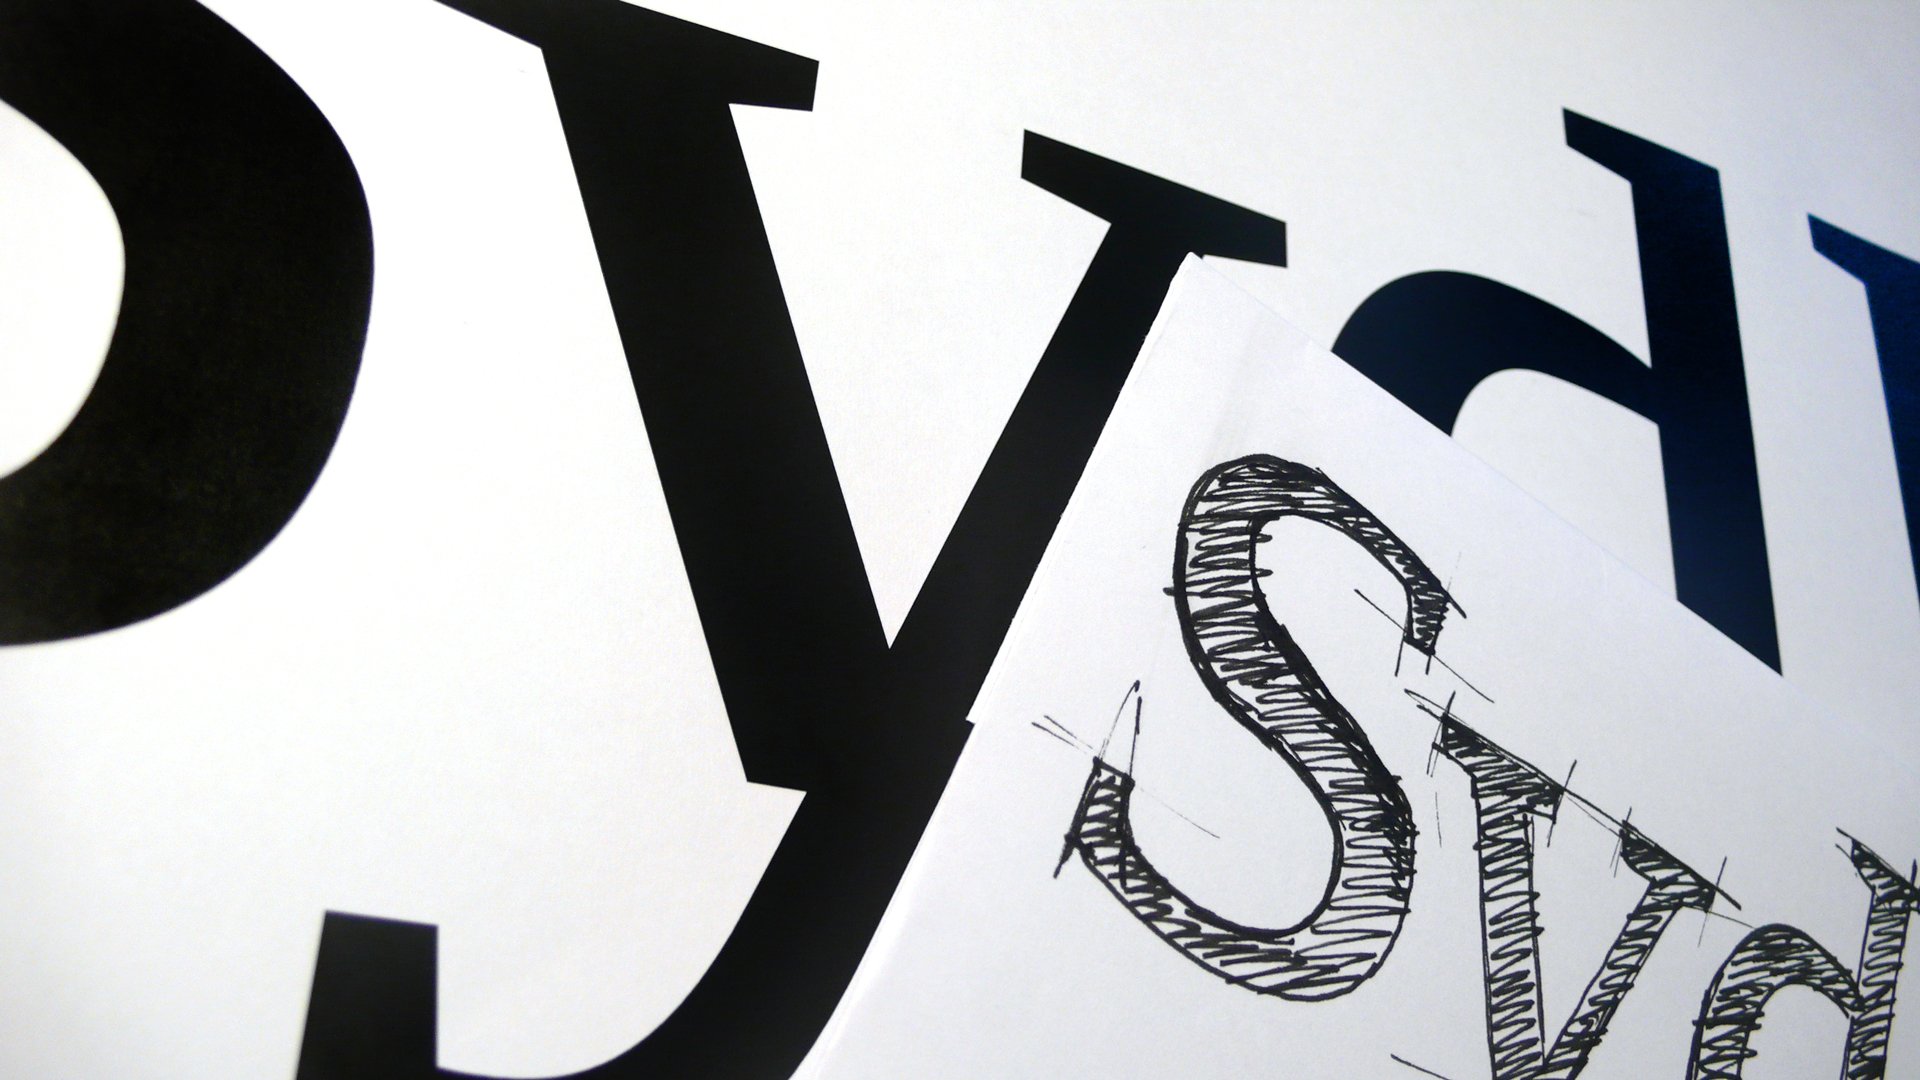 Sydbank font sketches by LOOP Associates